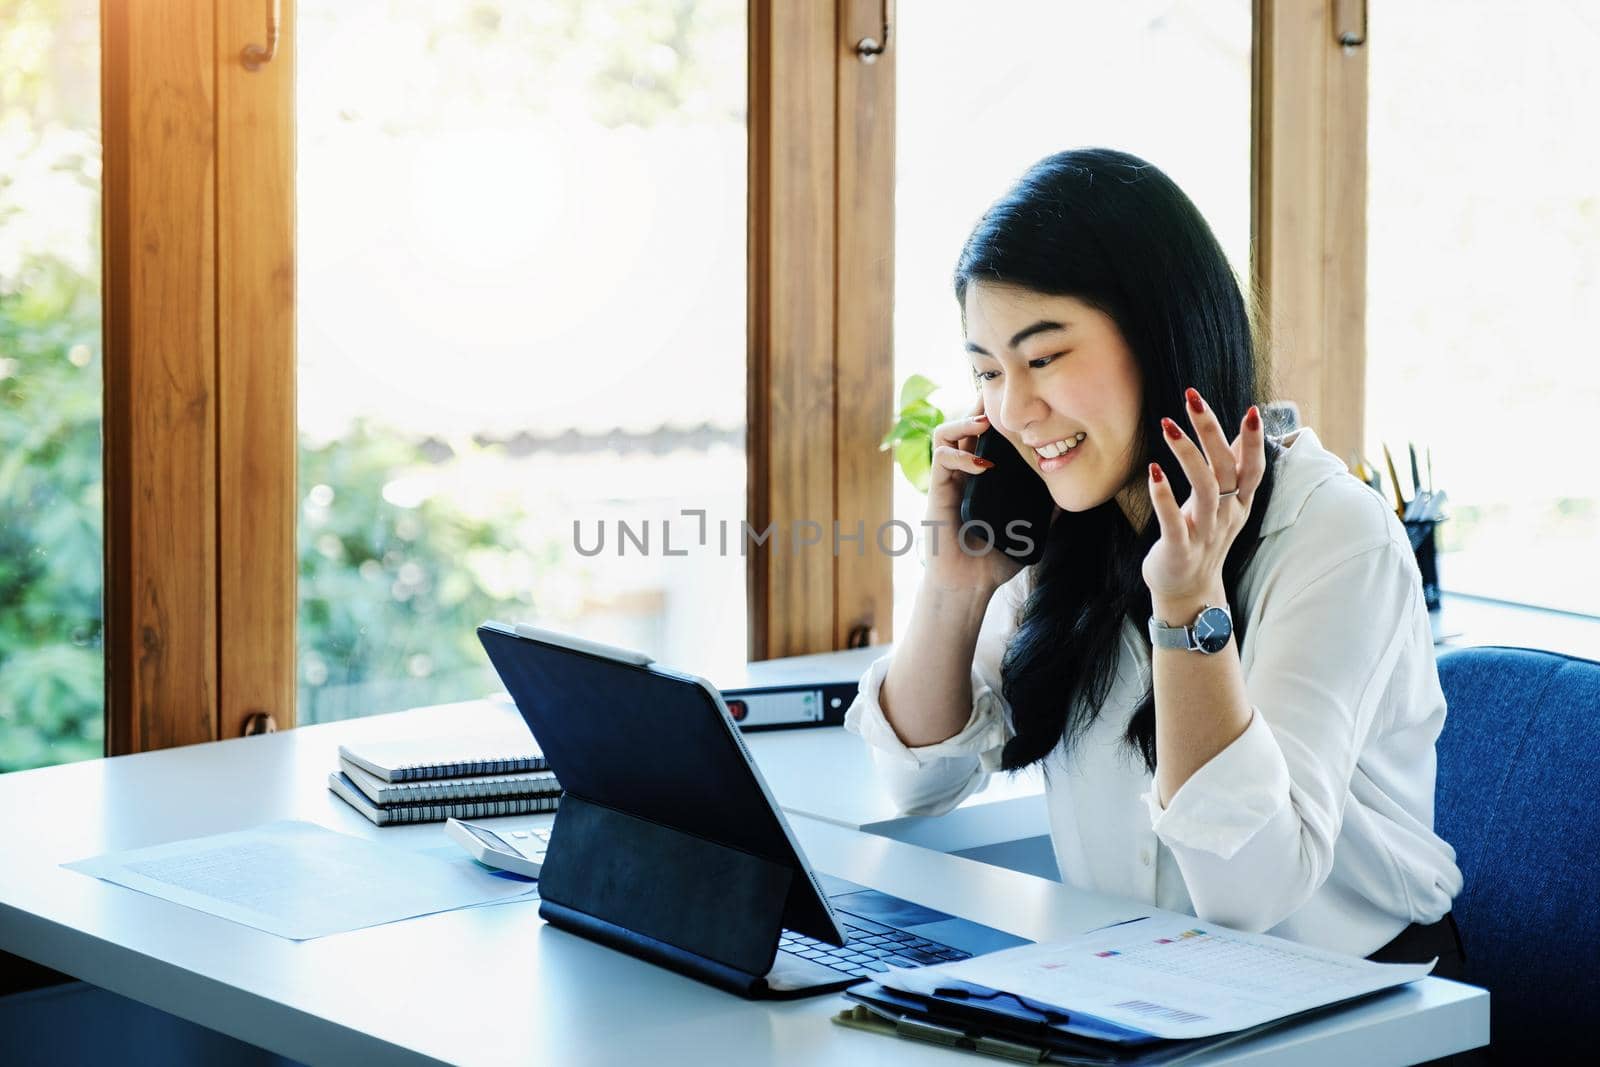 A female entrepreneur or businesswoman shows a smiling face while using smartphone and tablet computer for video conference working on a wooden table. by Manastrong